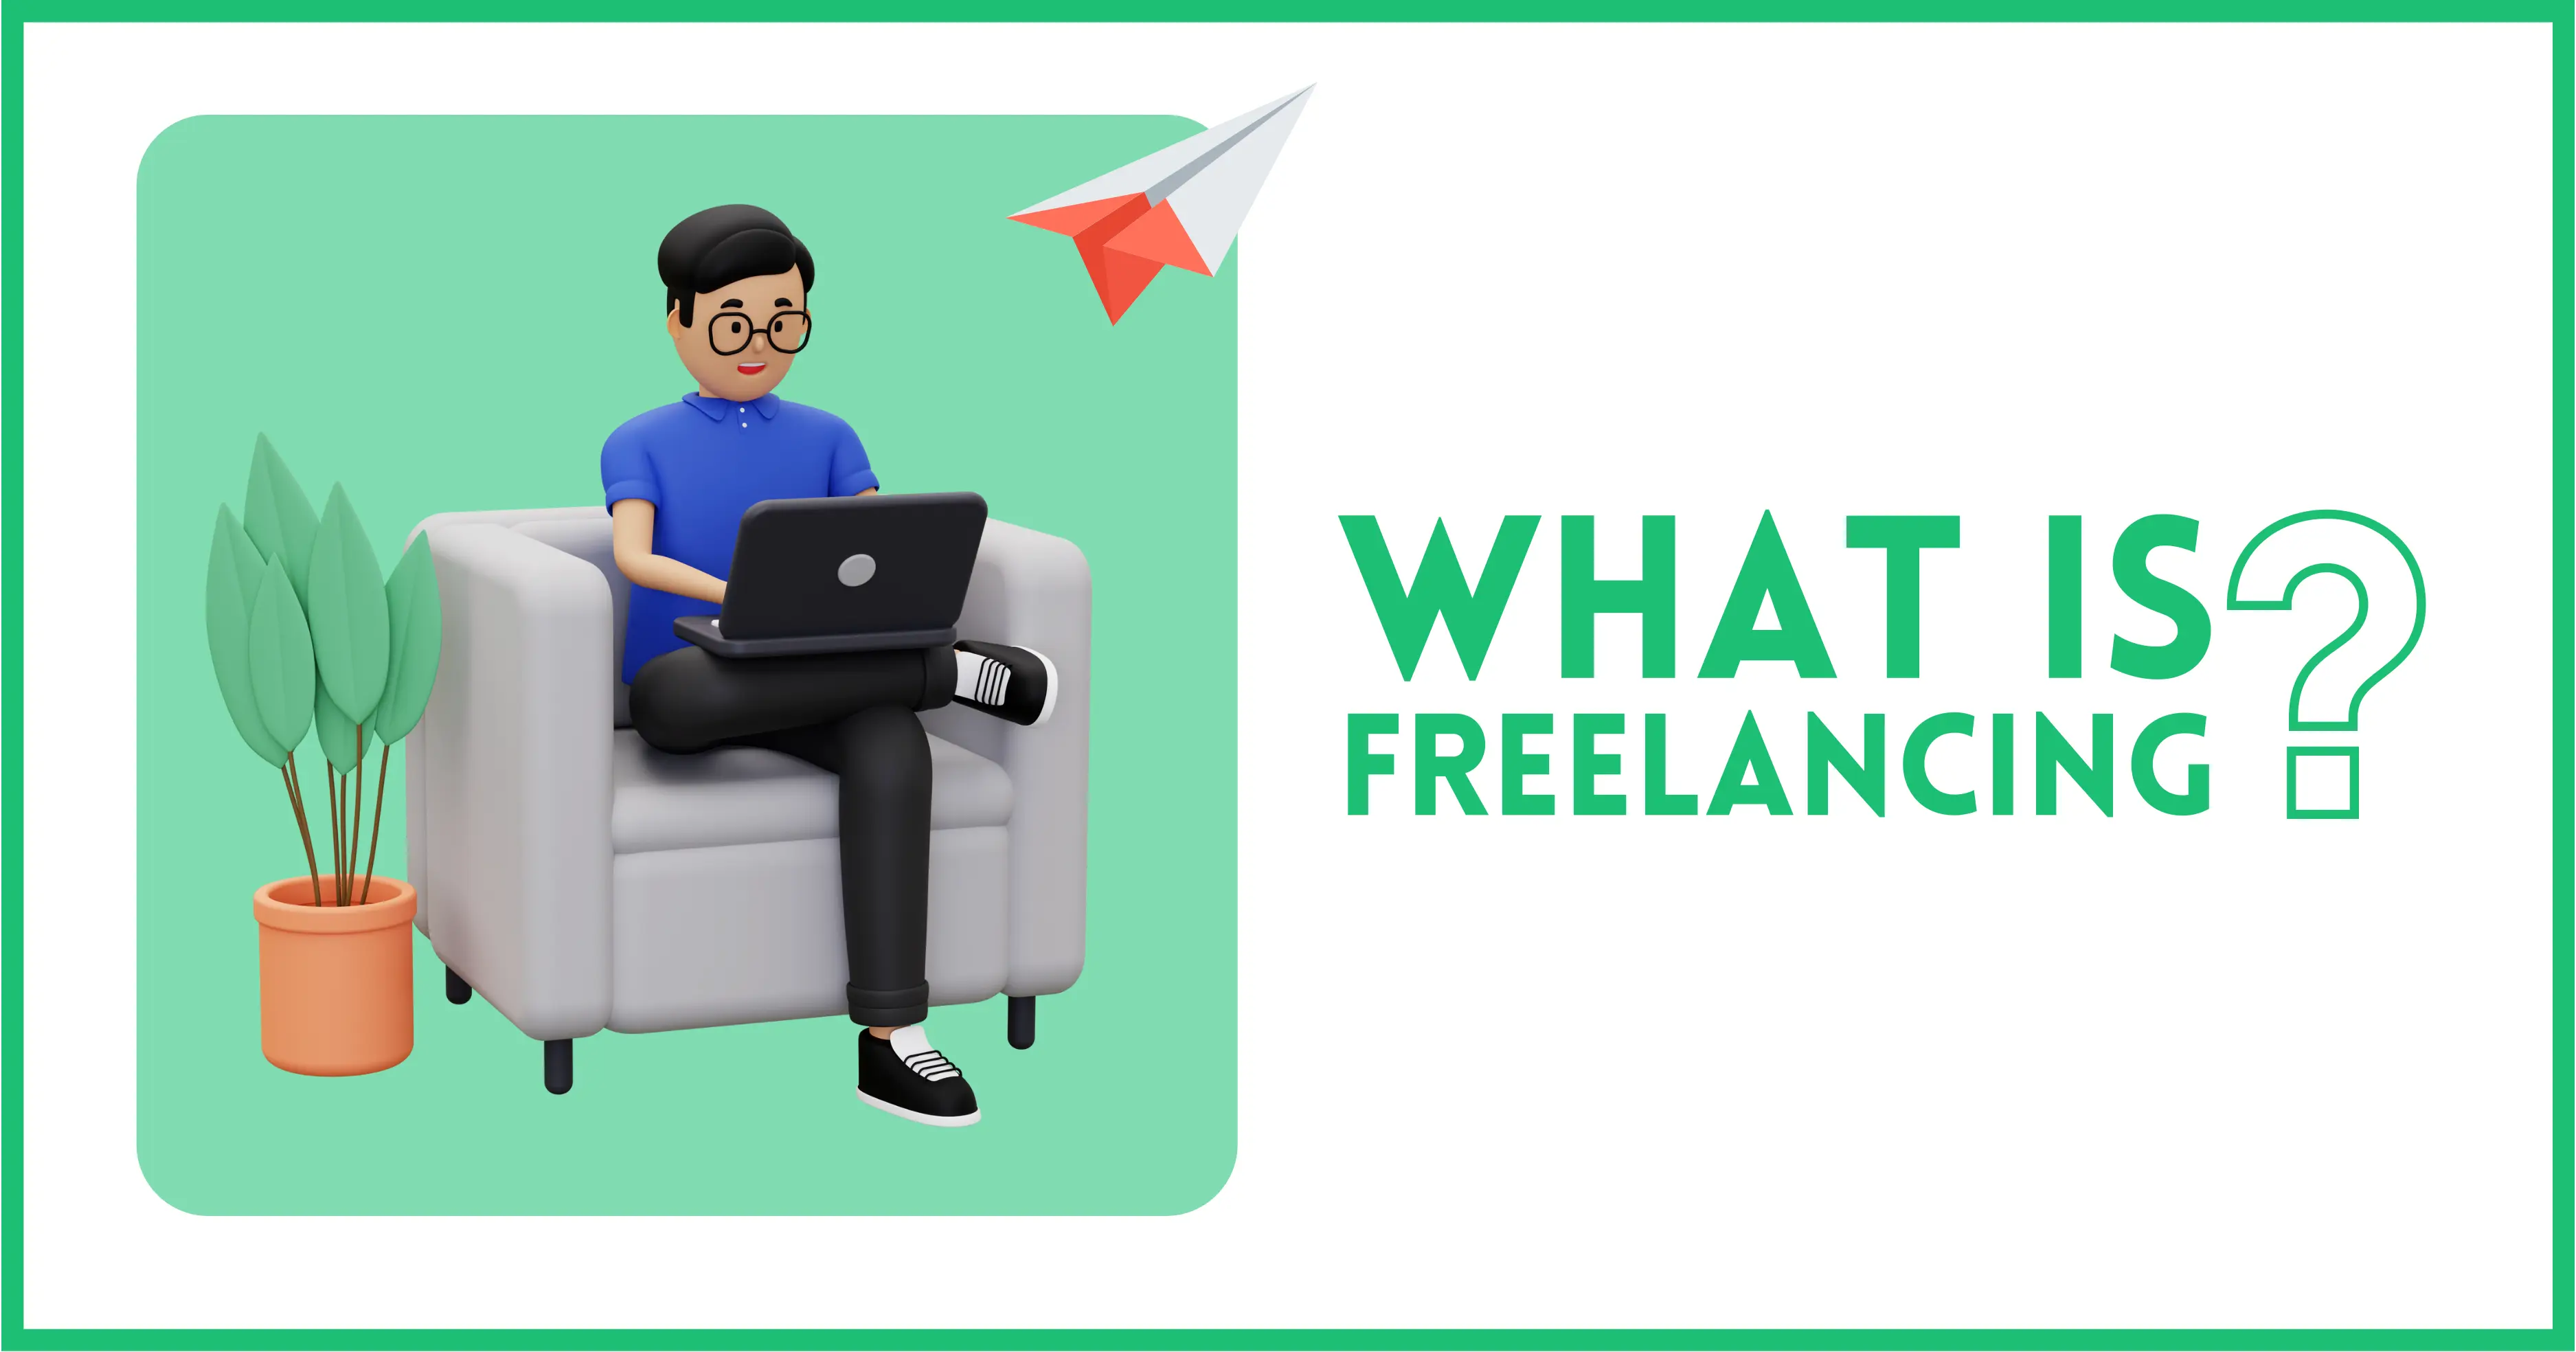 What is freelancing? Know these guidelines to build a freelancing career! | Chartered Skills